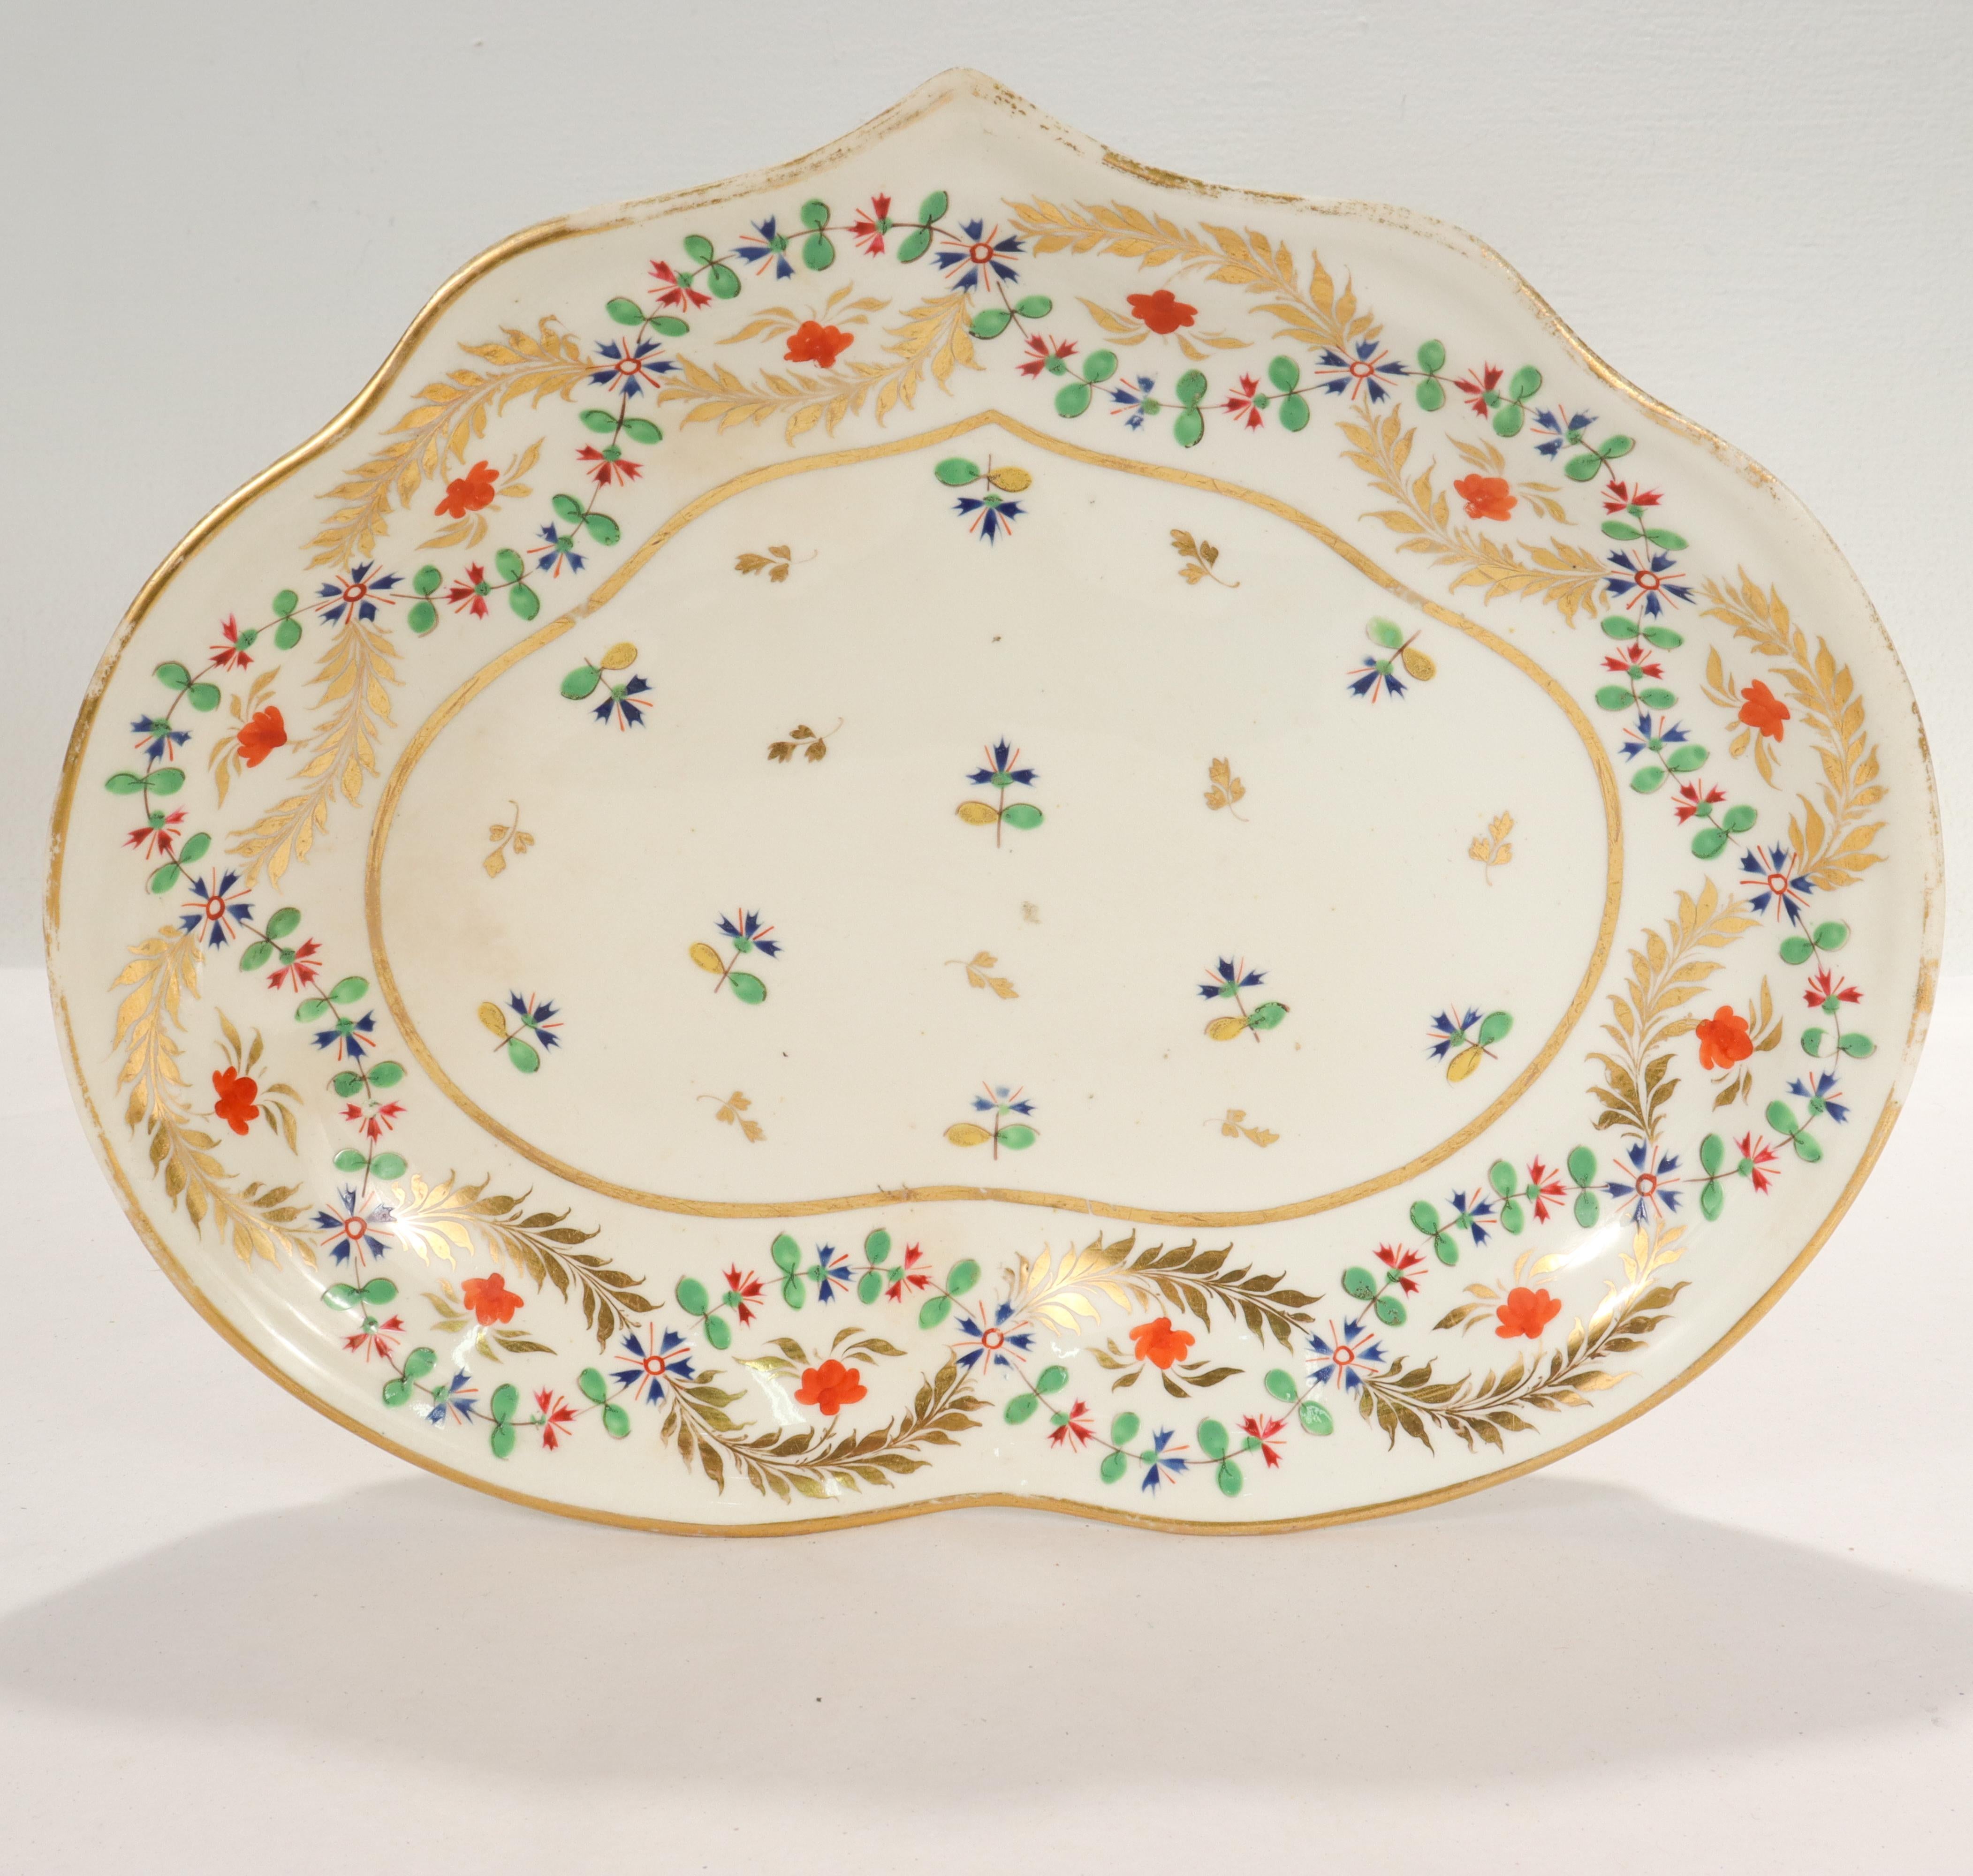 A fine antique 19th century English porcelain shaped dish.

Decorated throughout with a colorfully painted blue cornflower and gilt accents. The rim features intertwining painted flowers and gilt garlands.

Simply a wonderful piece of English